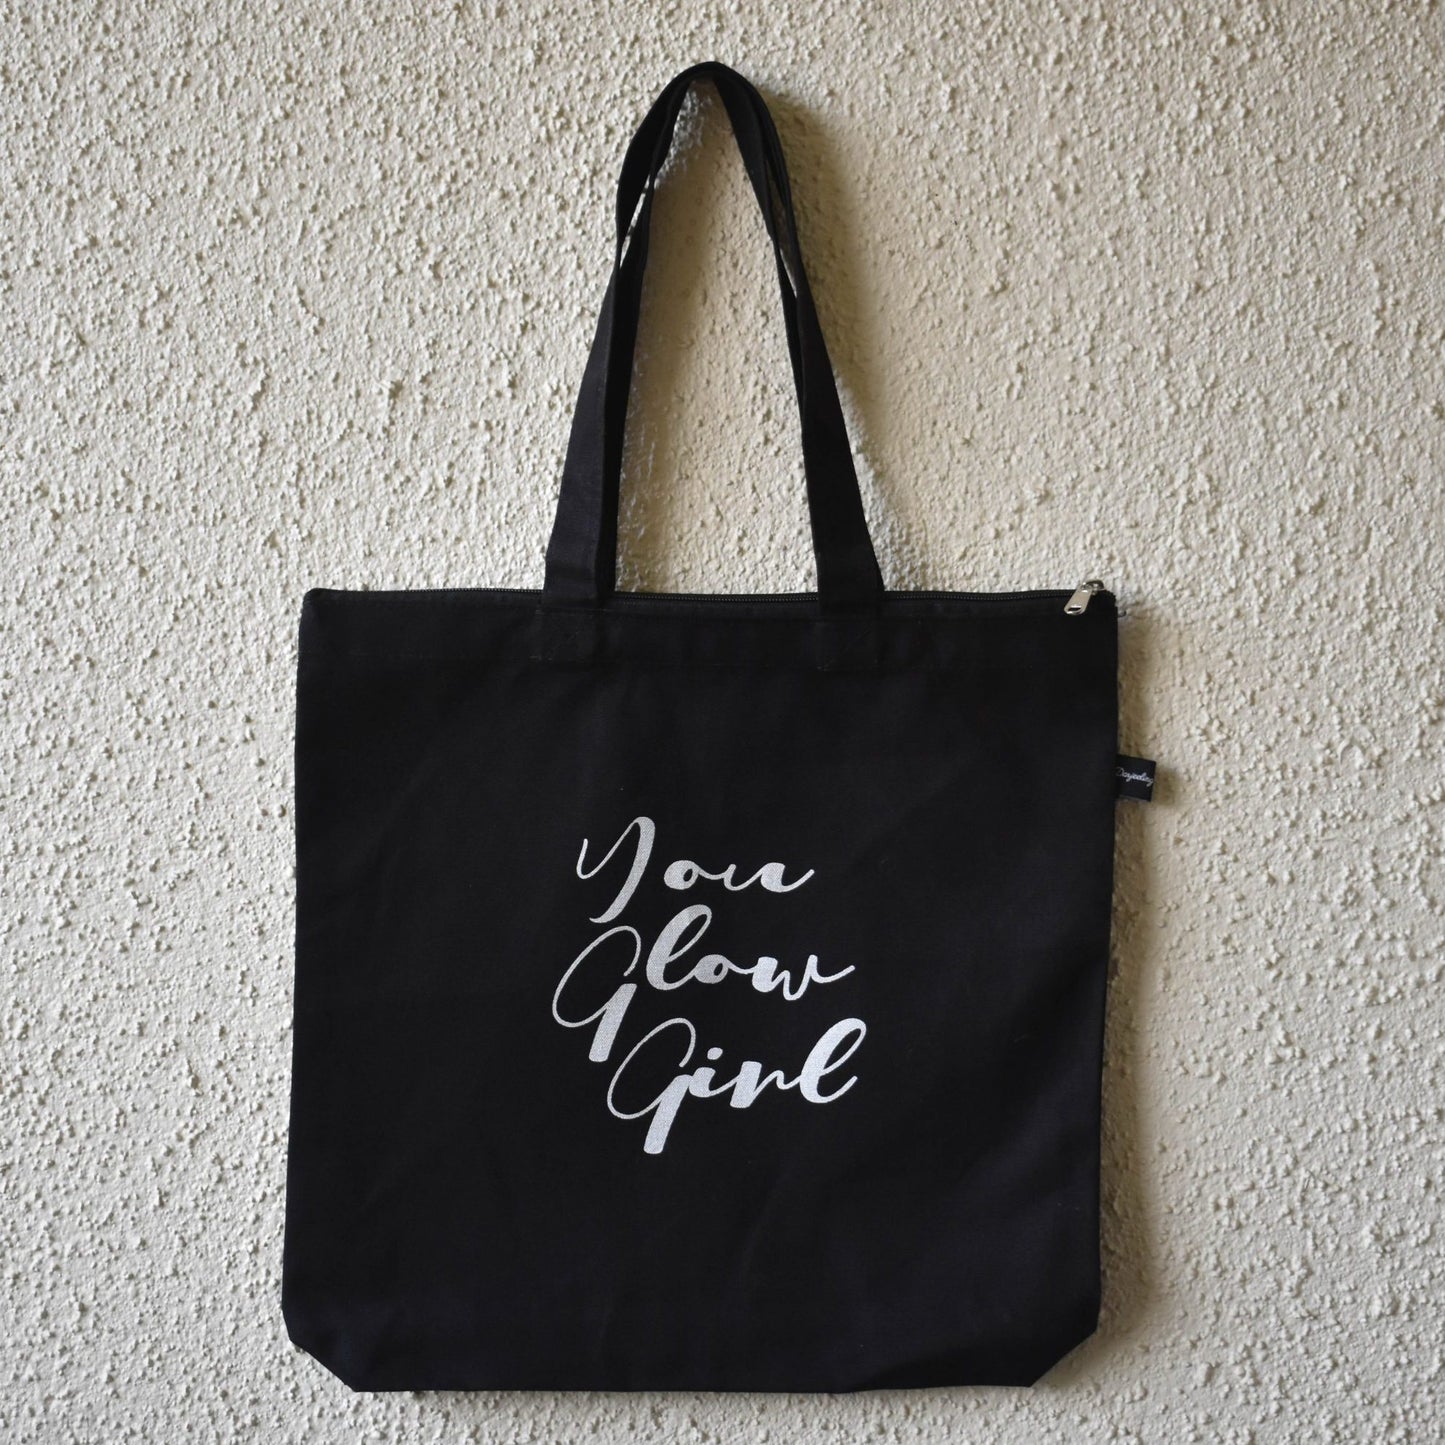 You Glow Girl black canvas tote